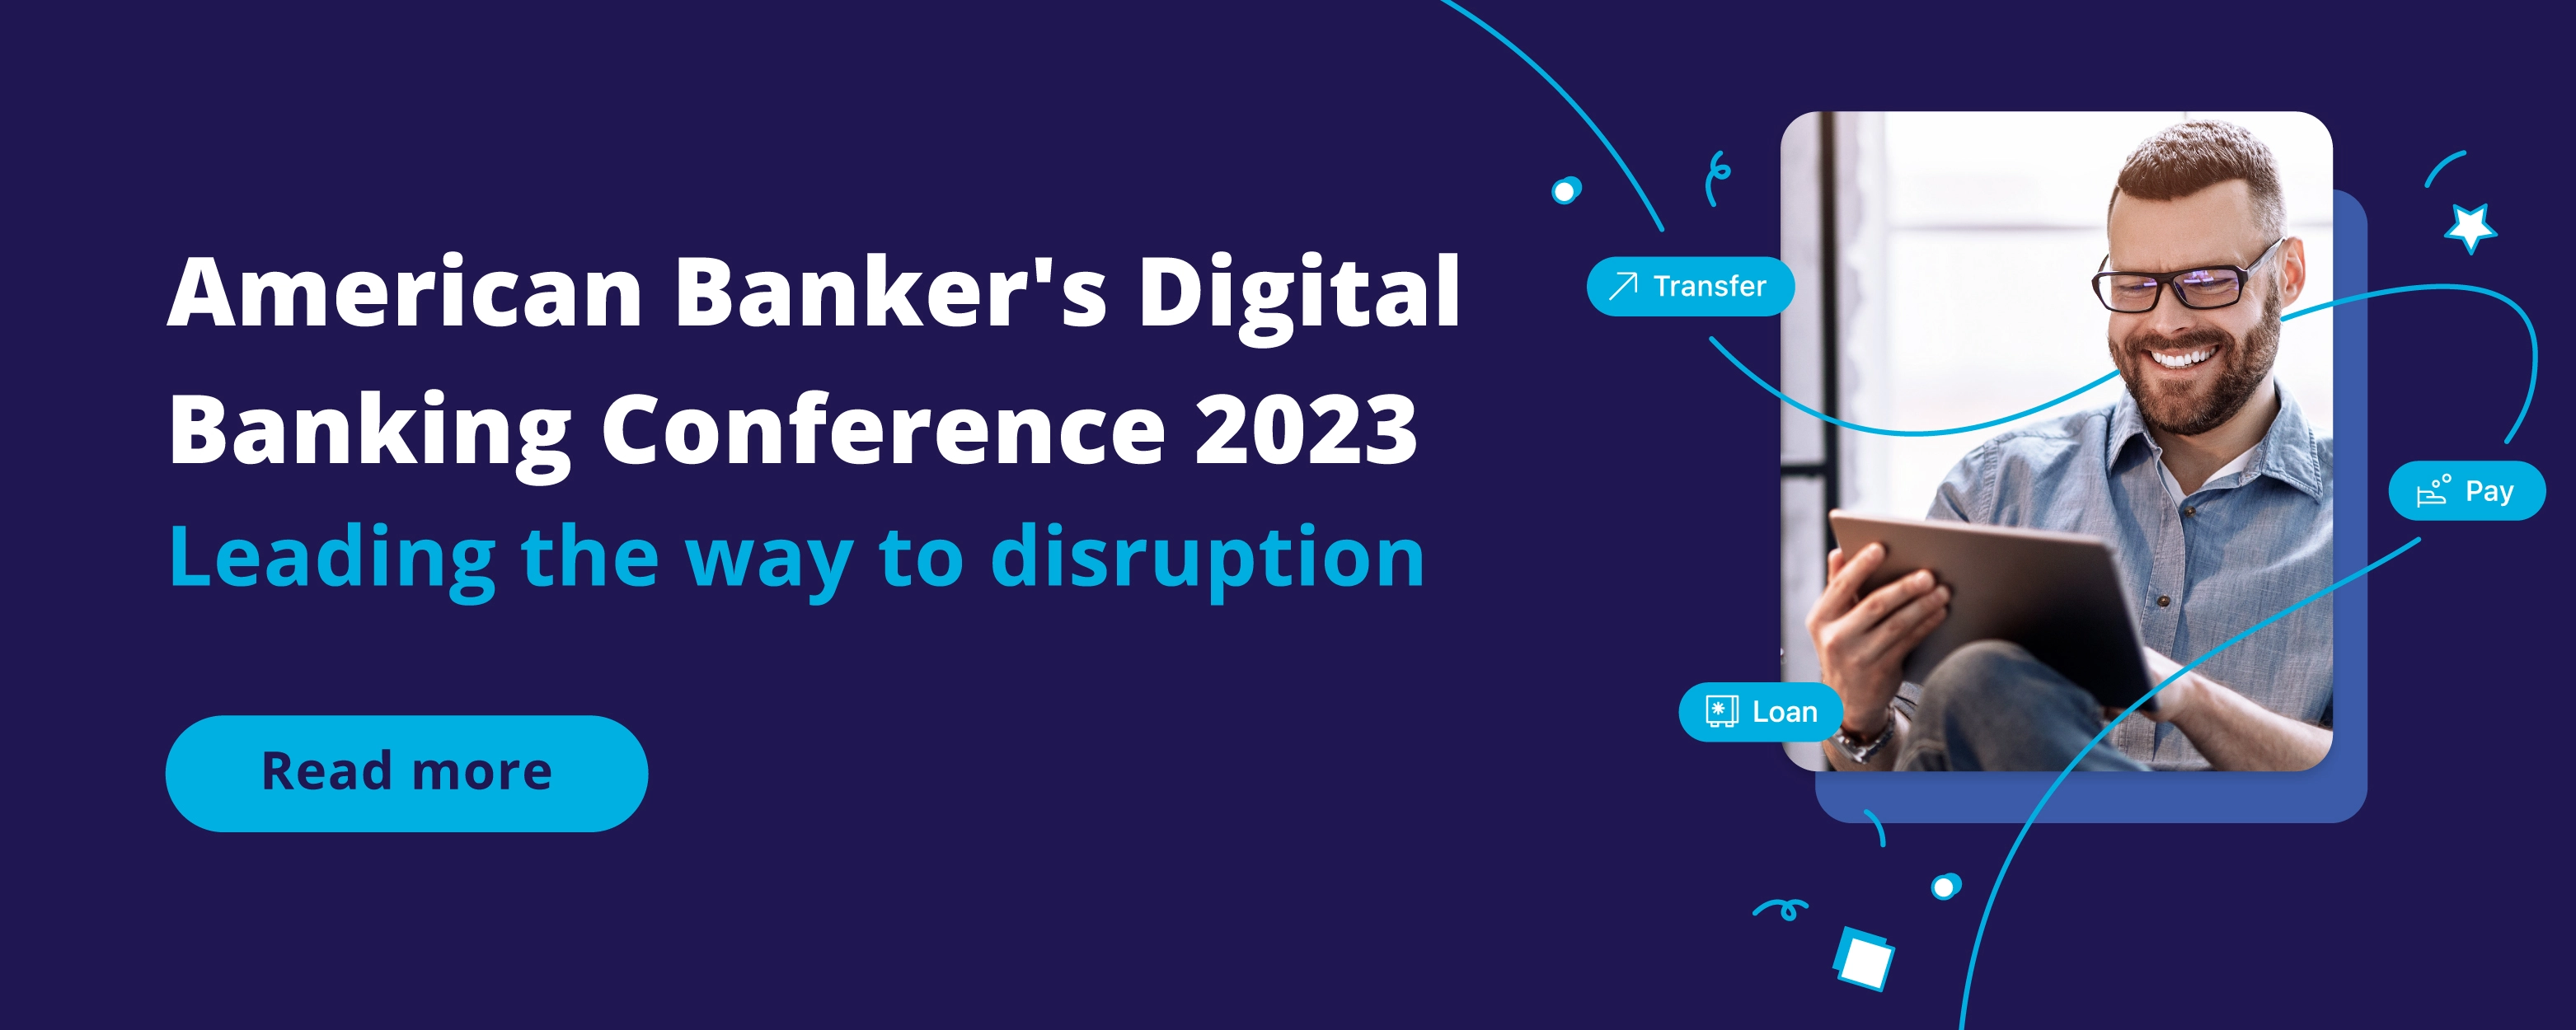 American Bankers Digital Banking Conference leading the way to disruption banner